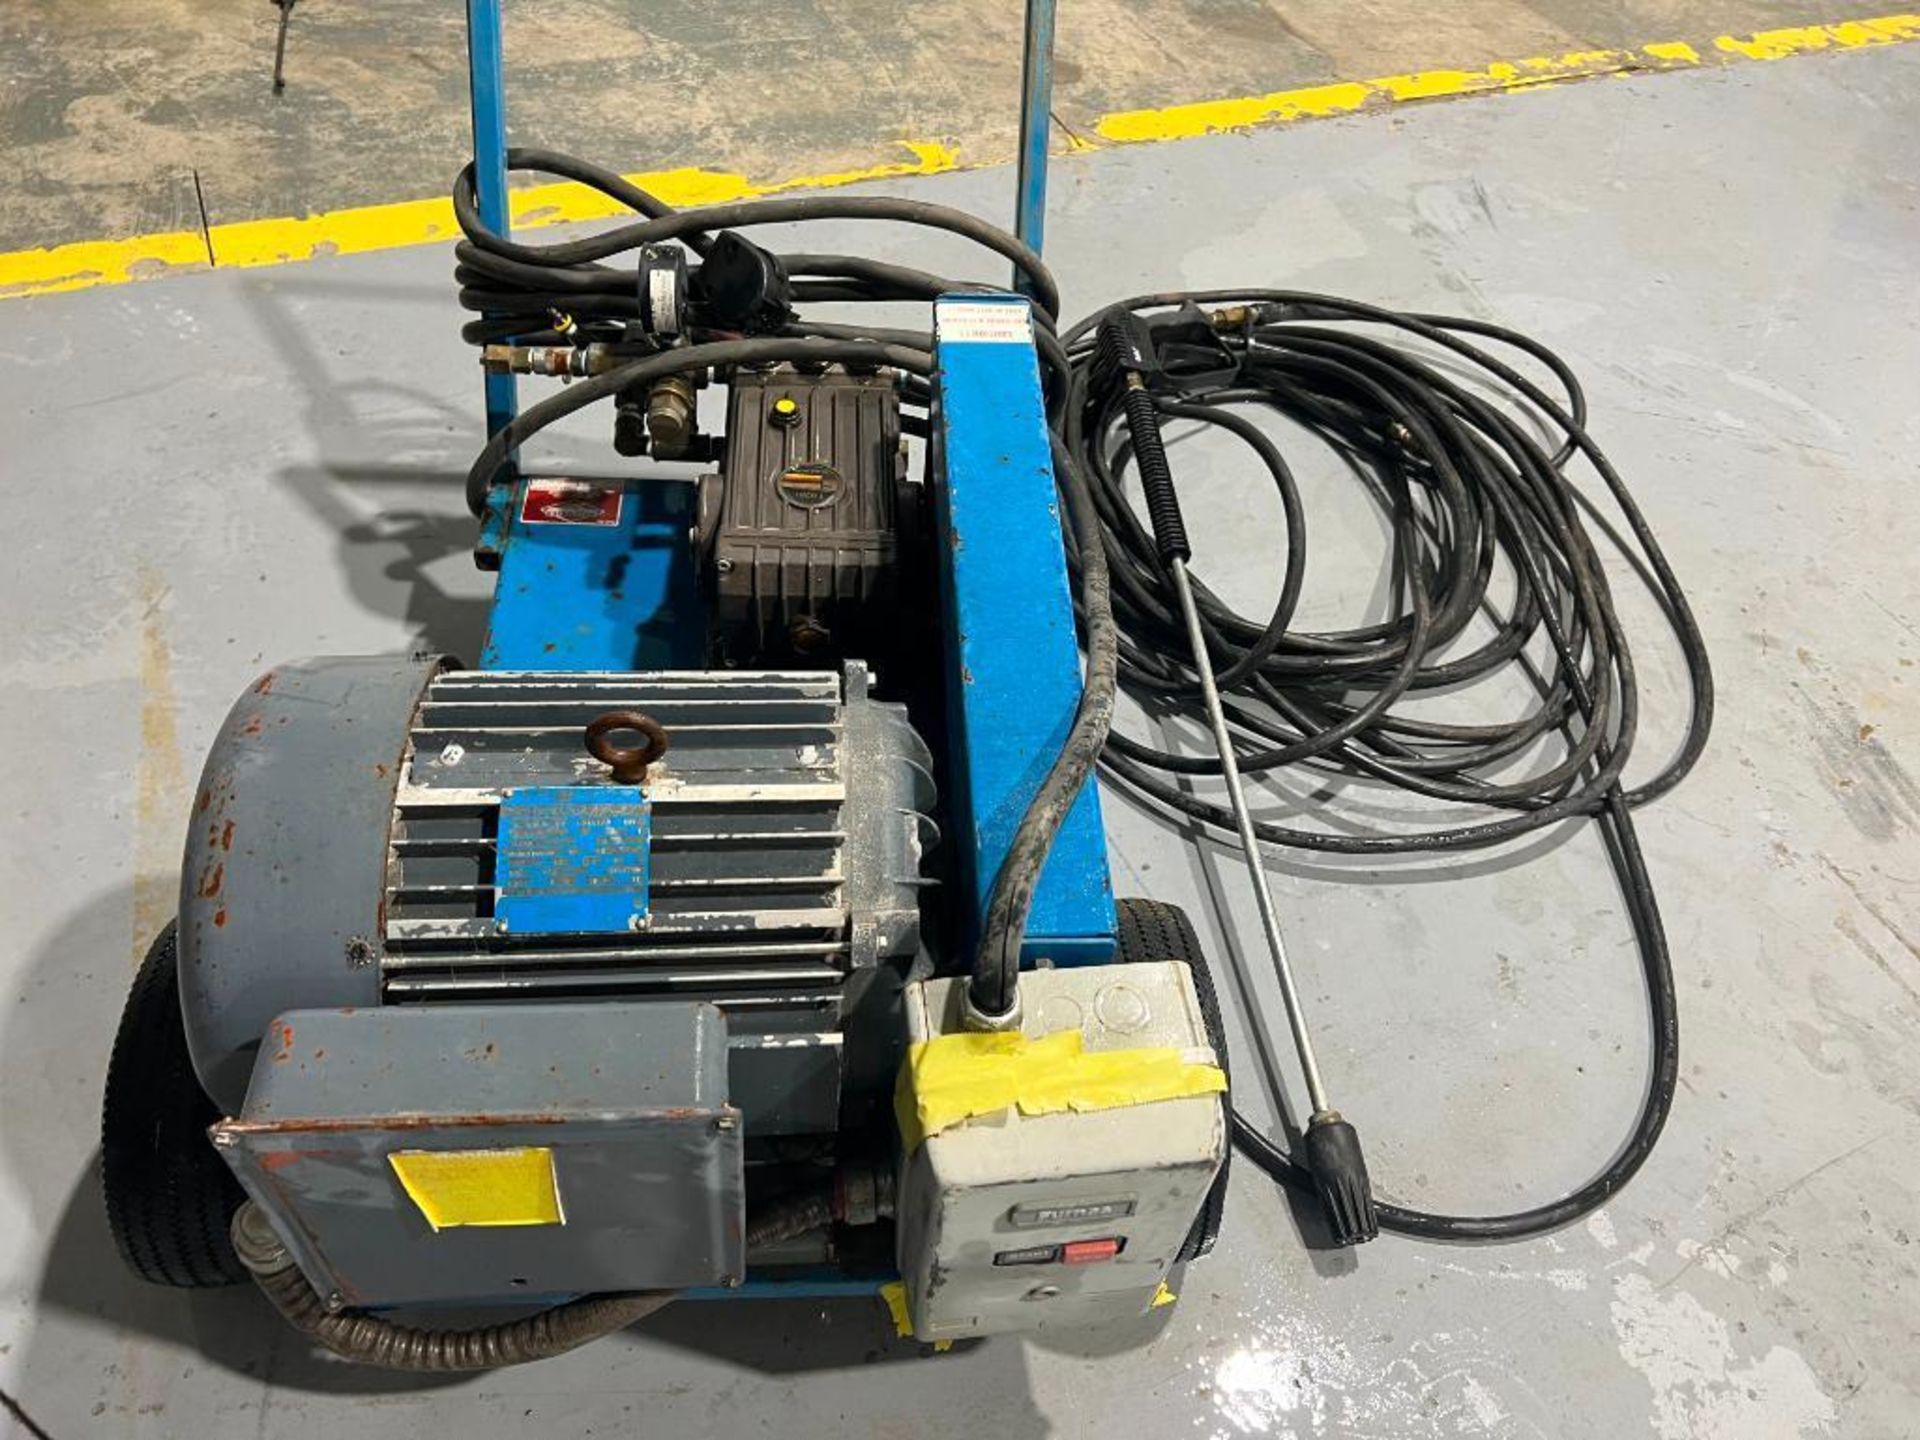 Dultmeier Sales Pressure Washer Farm 25, Model #DU PMT9281B, Serial #31 with Wand and Hose. Located - Image 12 of 16